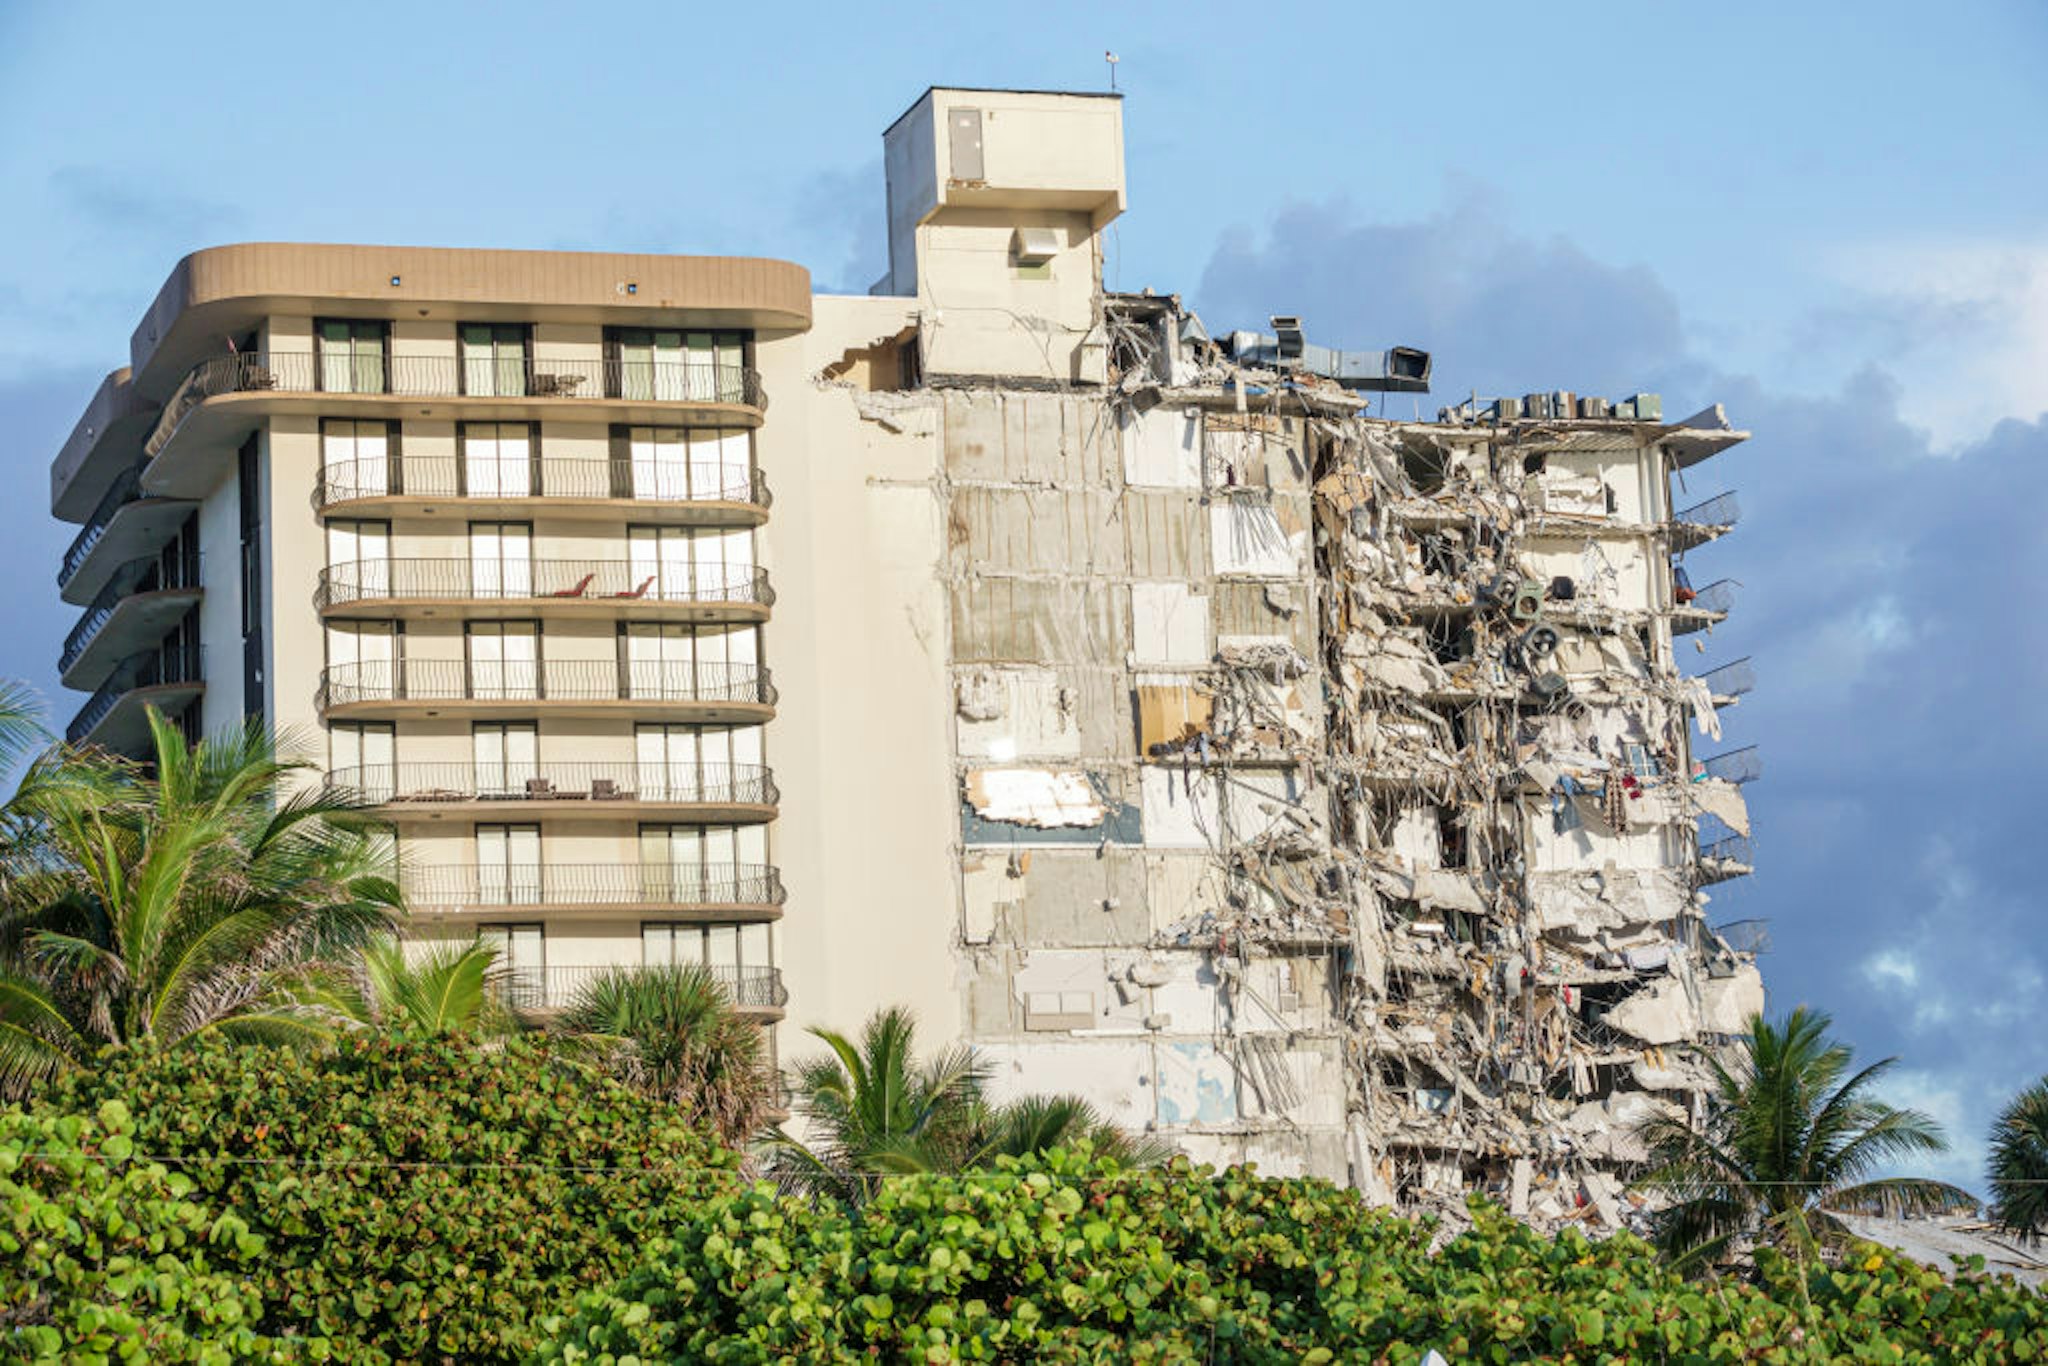 Damage caused by the partial collapse of the Champlain Towers condominium building, Surfside, Miami Beach, Florida. (Photo by: Jeff Greenberg/Universal Images Group via Getty Images)